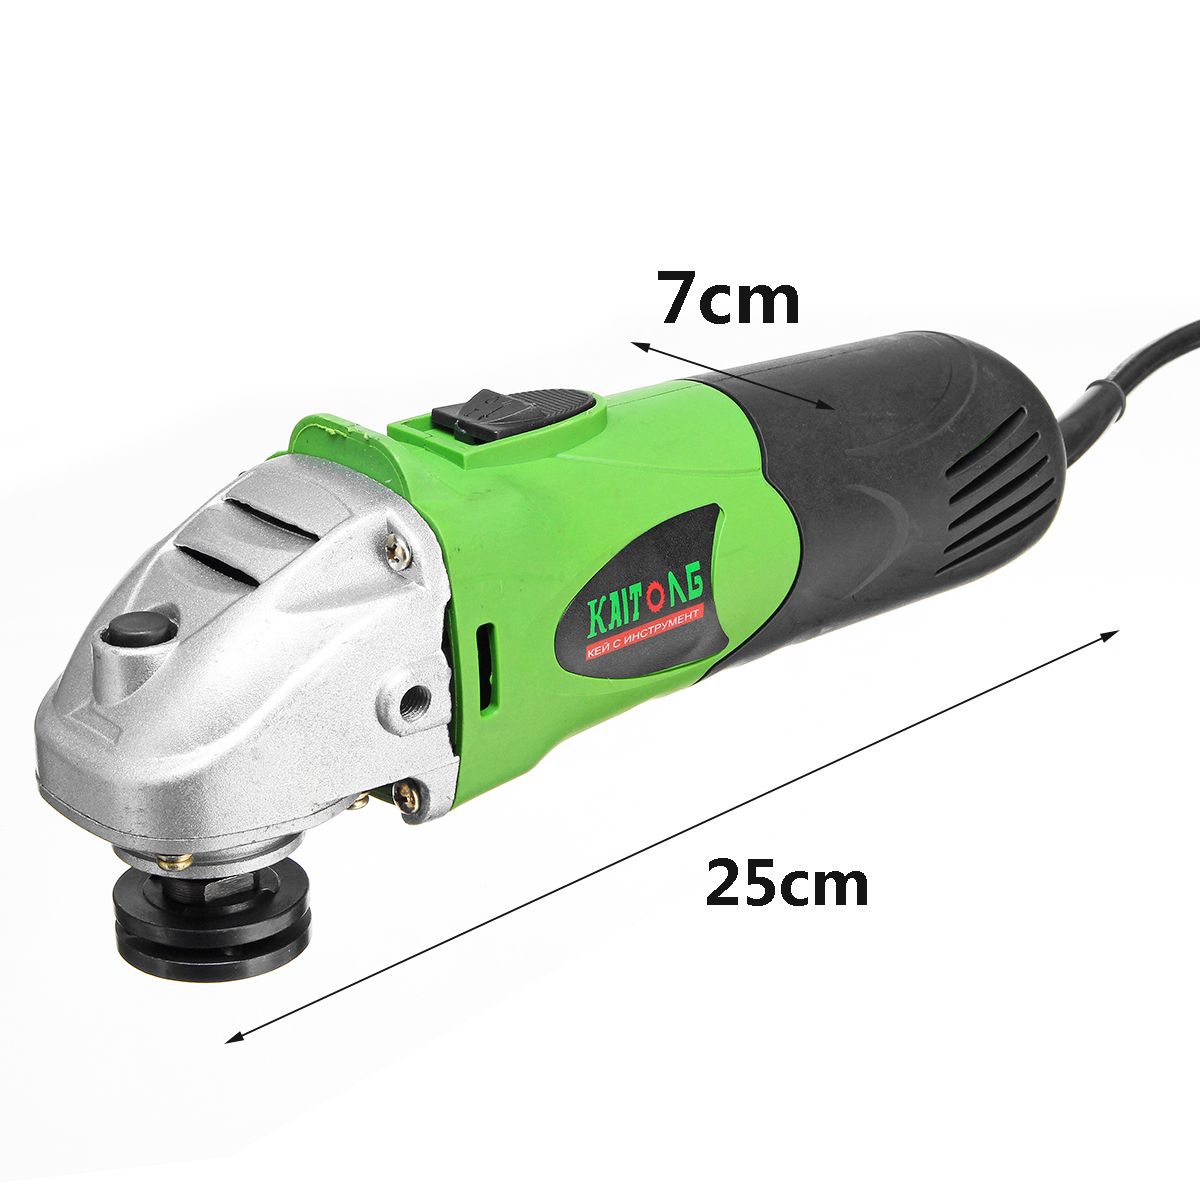 11000RPM-980W-Electric-Angle-Grinder-125mm-Grinding-Machine-Metal-Cutting-Tool-1435266